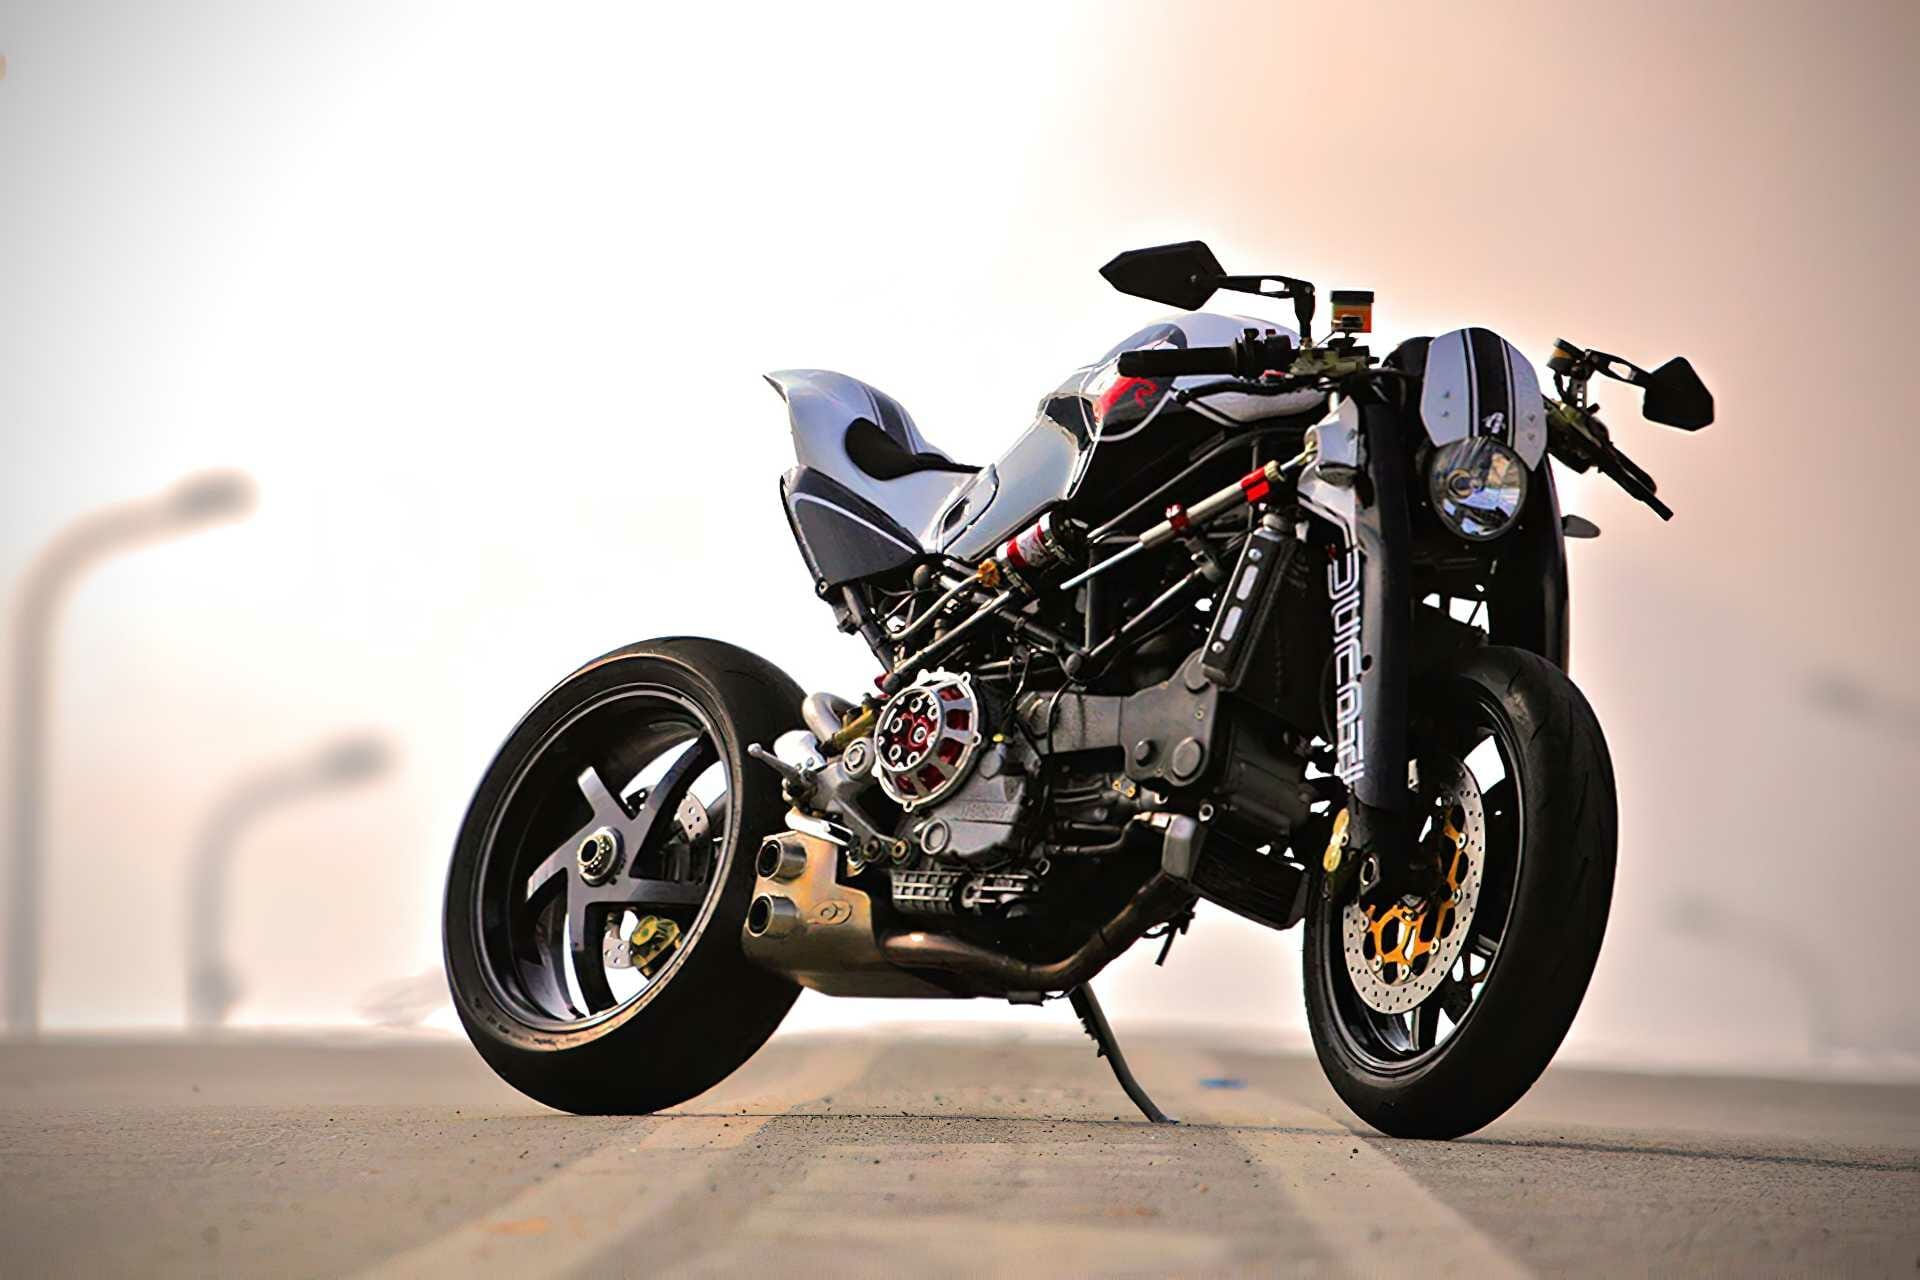 Custom Monster SR4R by Paolo Tesio
- also in the MOTORCYCLES.NEWS APP